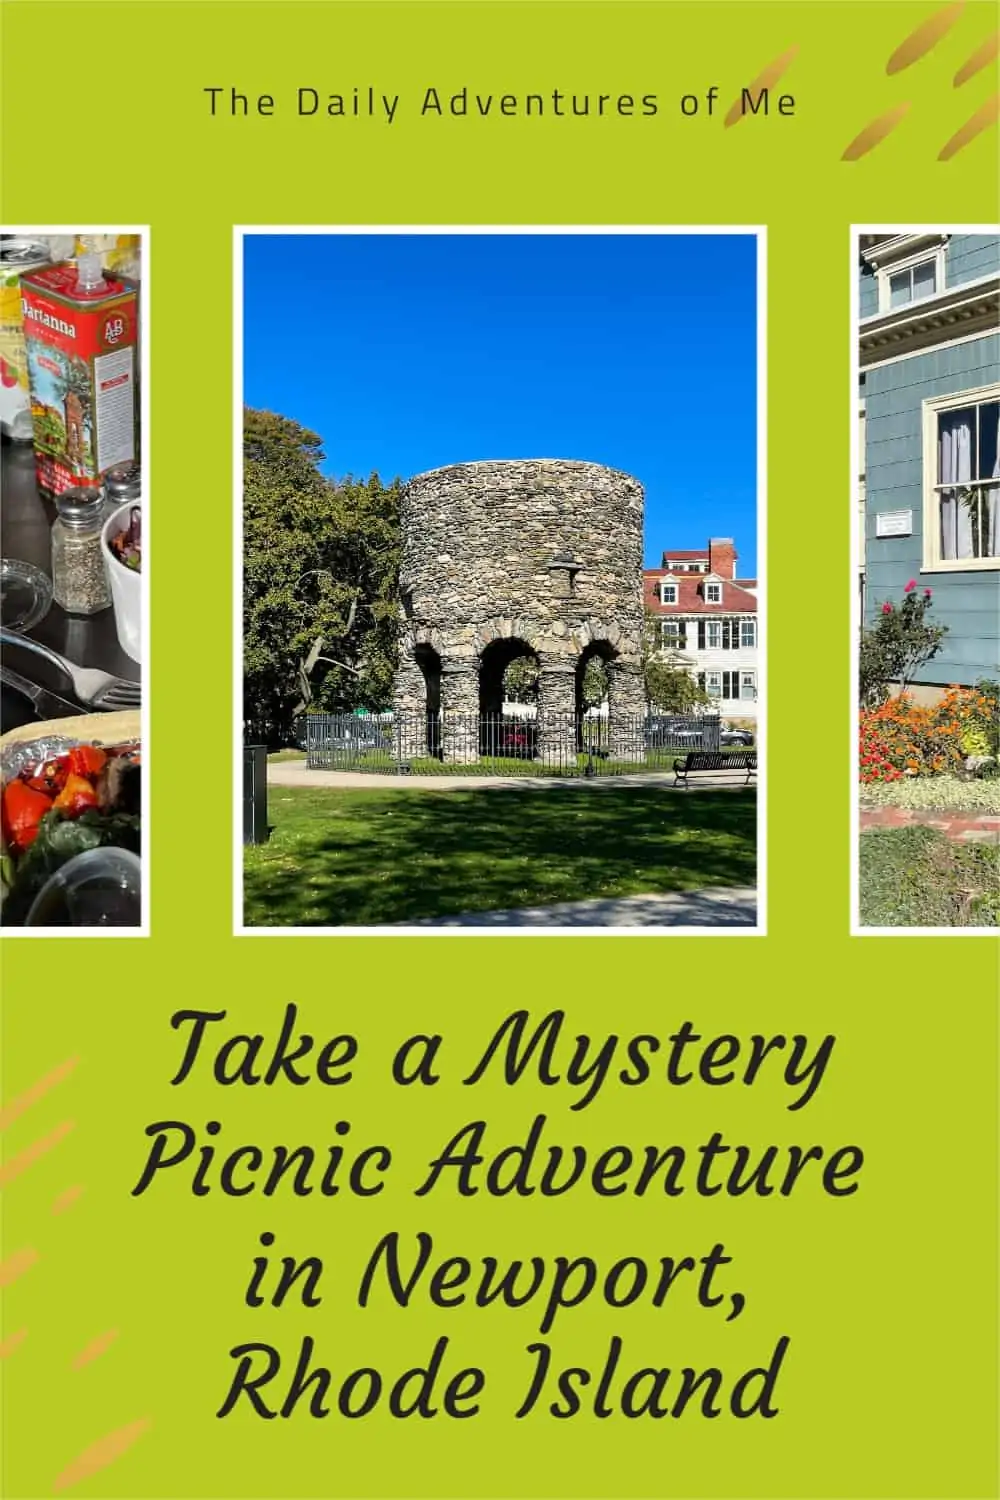 Are you looking for a fun day outing in Newport, Rhode Island that will also help you learn about the area? Read on for my experience with an AmazingCo Mystery Picnic. #thingstodoinNewportRI #thingstodoinNewEngland #mysterypicnic